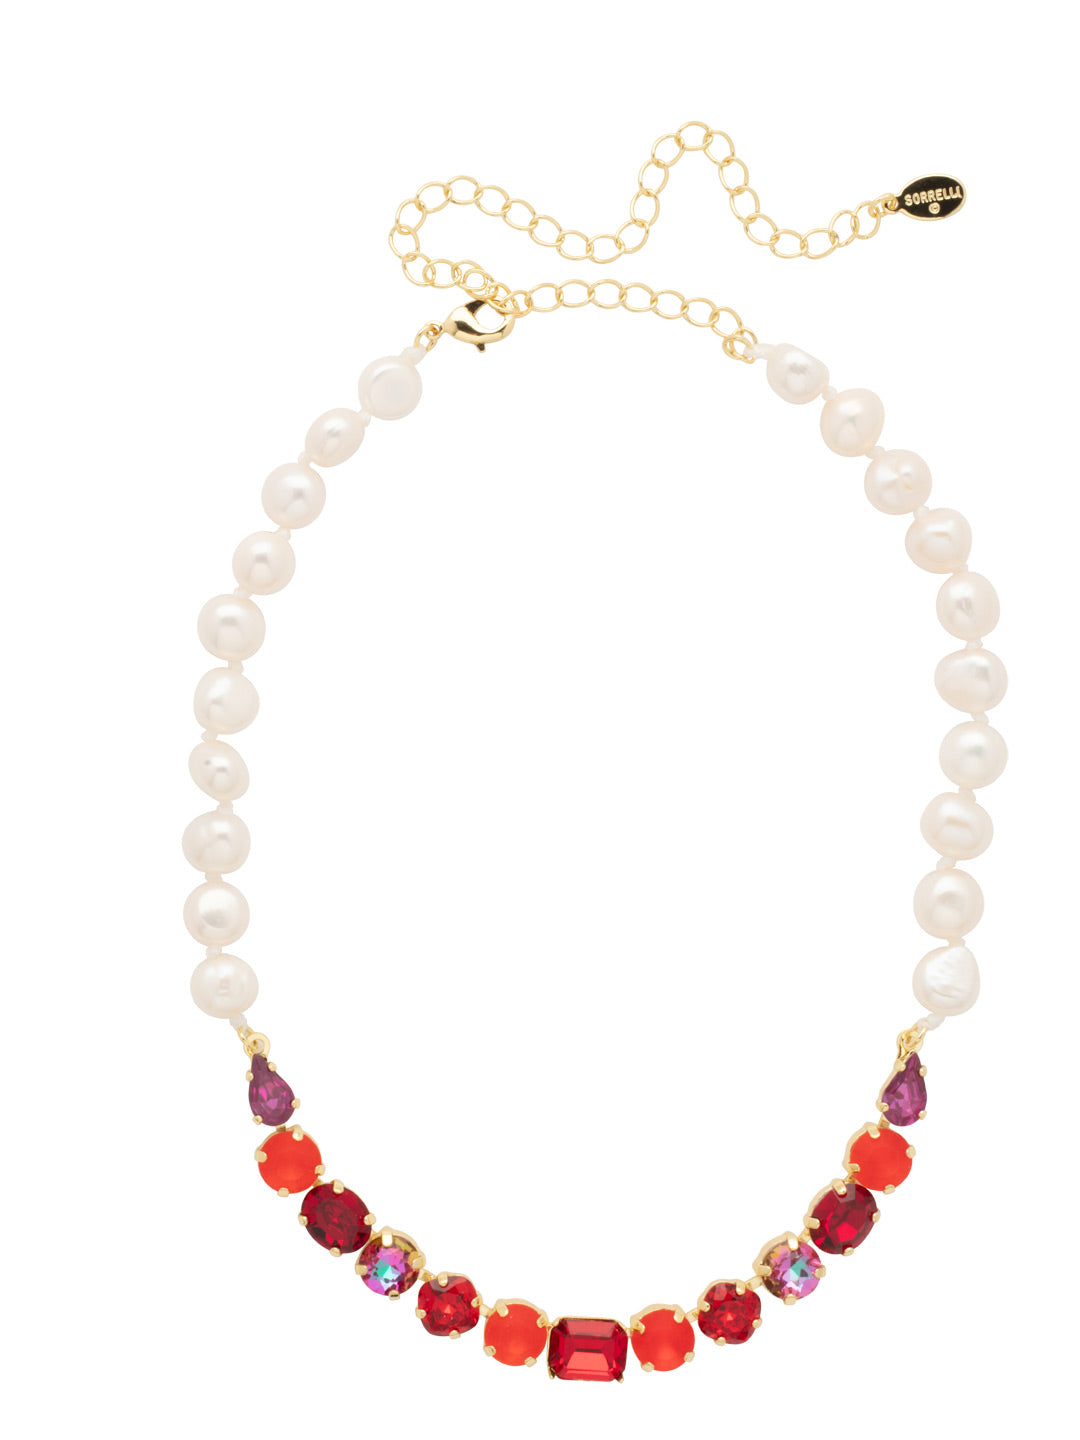 Cadenza Tennis Necklace - NEC14BGFIS - <p>This classic beauty features a chain of wire-wrapped freshwater pearls supporting a delicate pattern of crystal shapes at its base. From Sorrelli's Fireside collection in our Bright Gold-tone finish.</p>